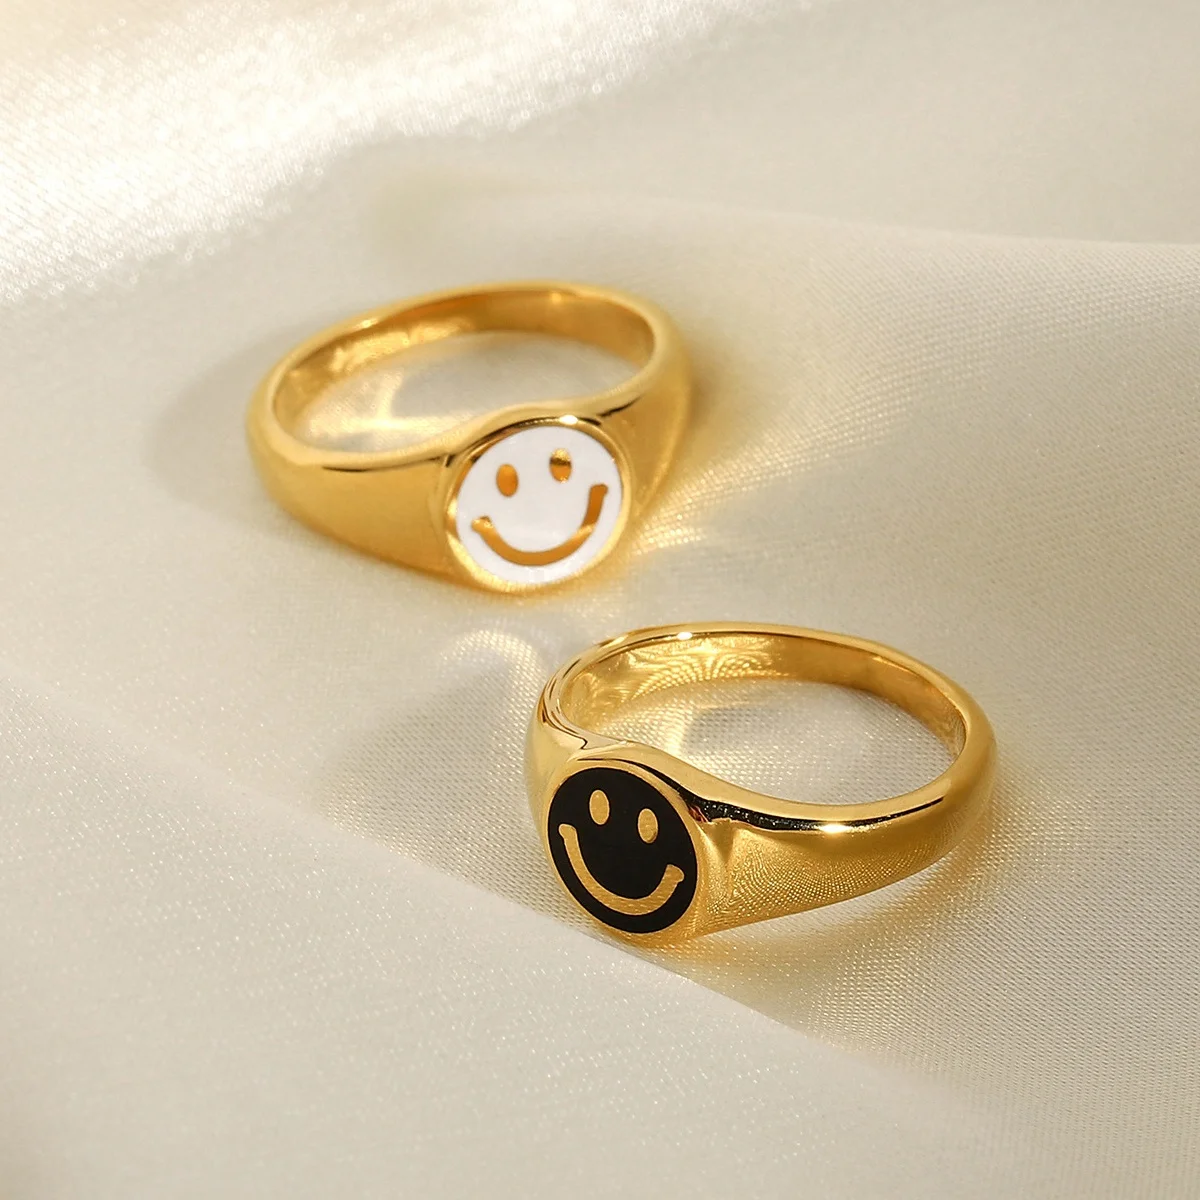 

Wholesale Custom Women's 18k Gold Plated Stainless Steel Jewelry Enamel Cute Happy Smile Smiley Face Ring for Women Girl, Gold color